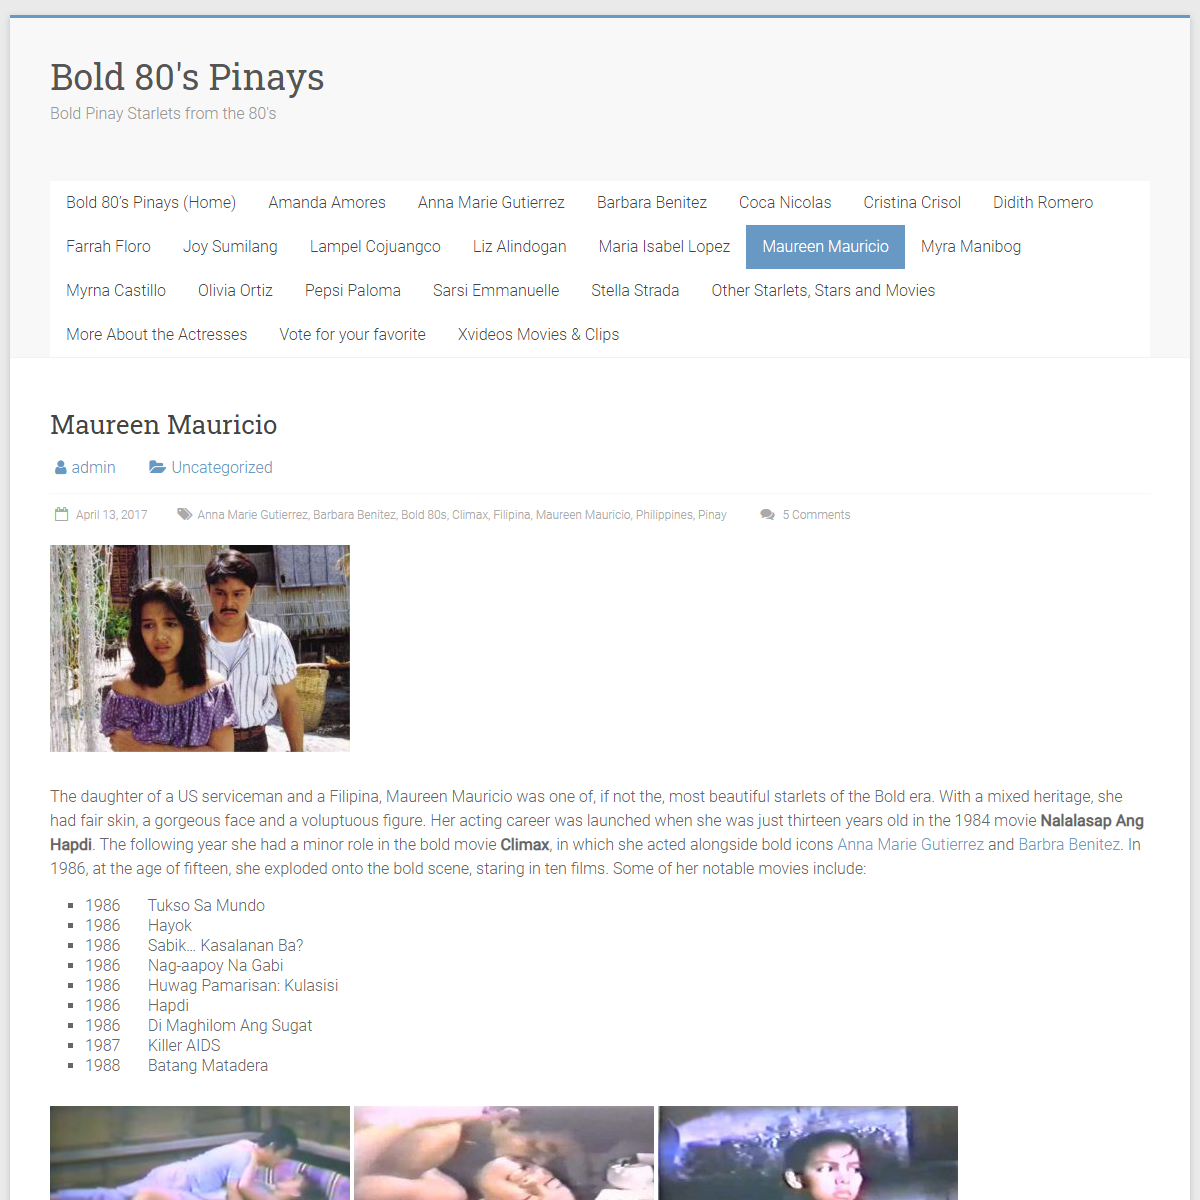 A complete backup of https://bold80spinays.com/2017/04/13/maureen-mauricio/